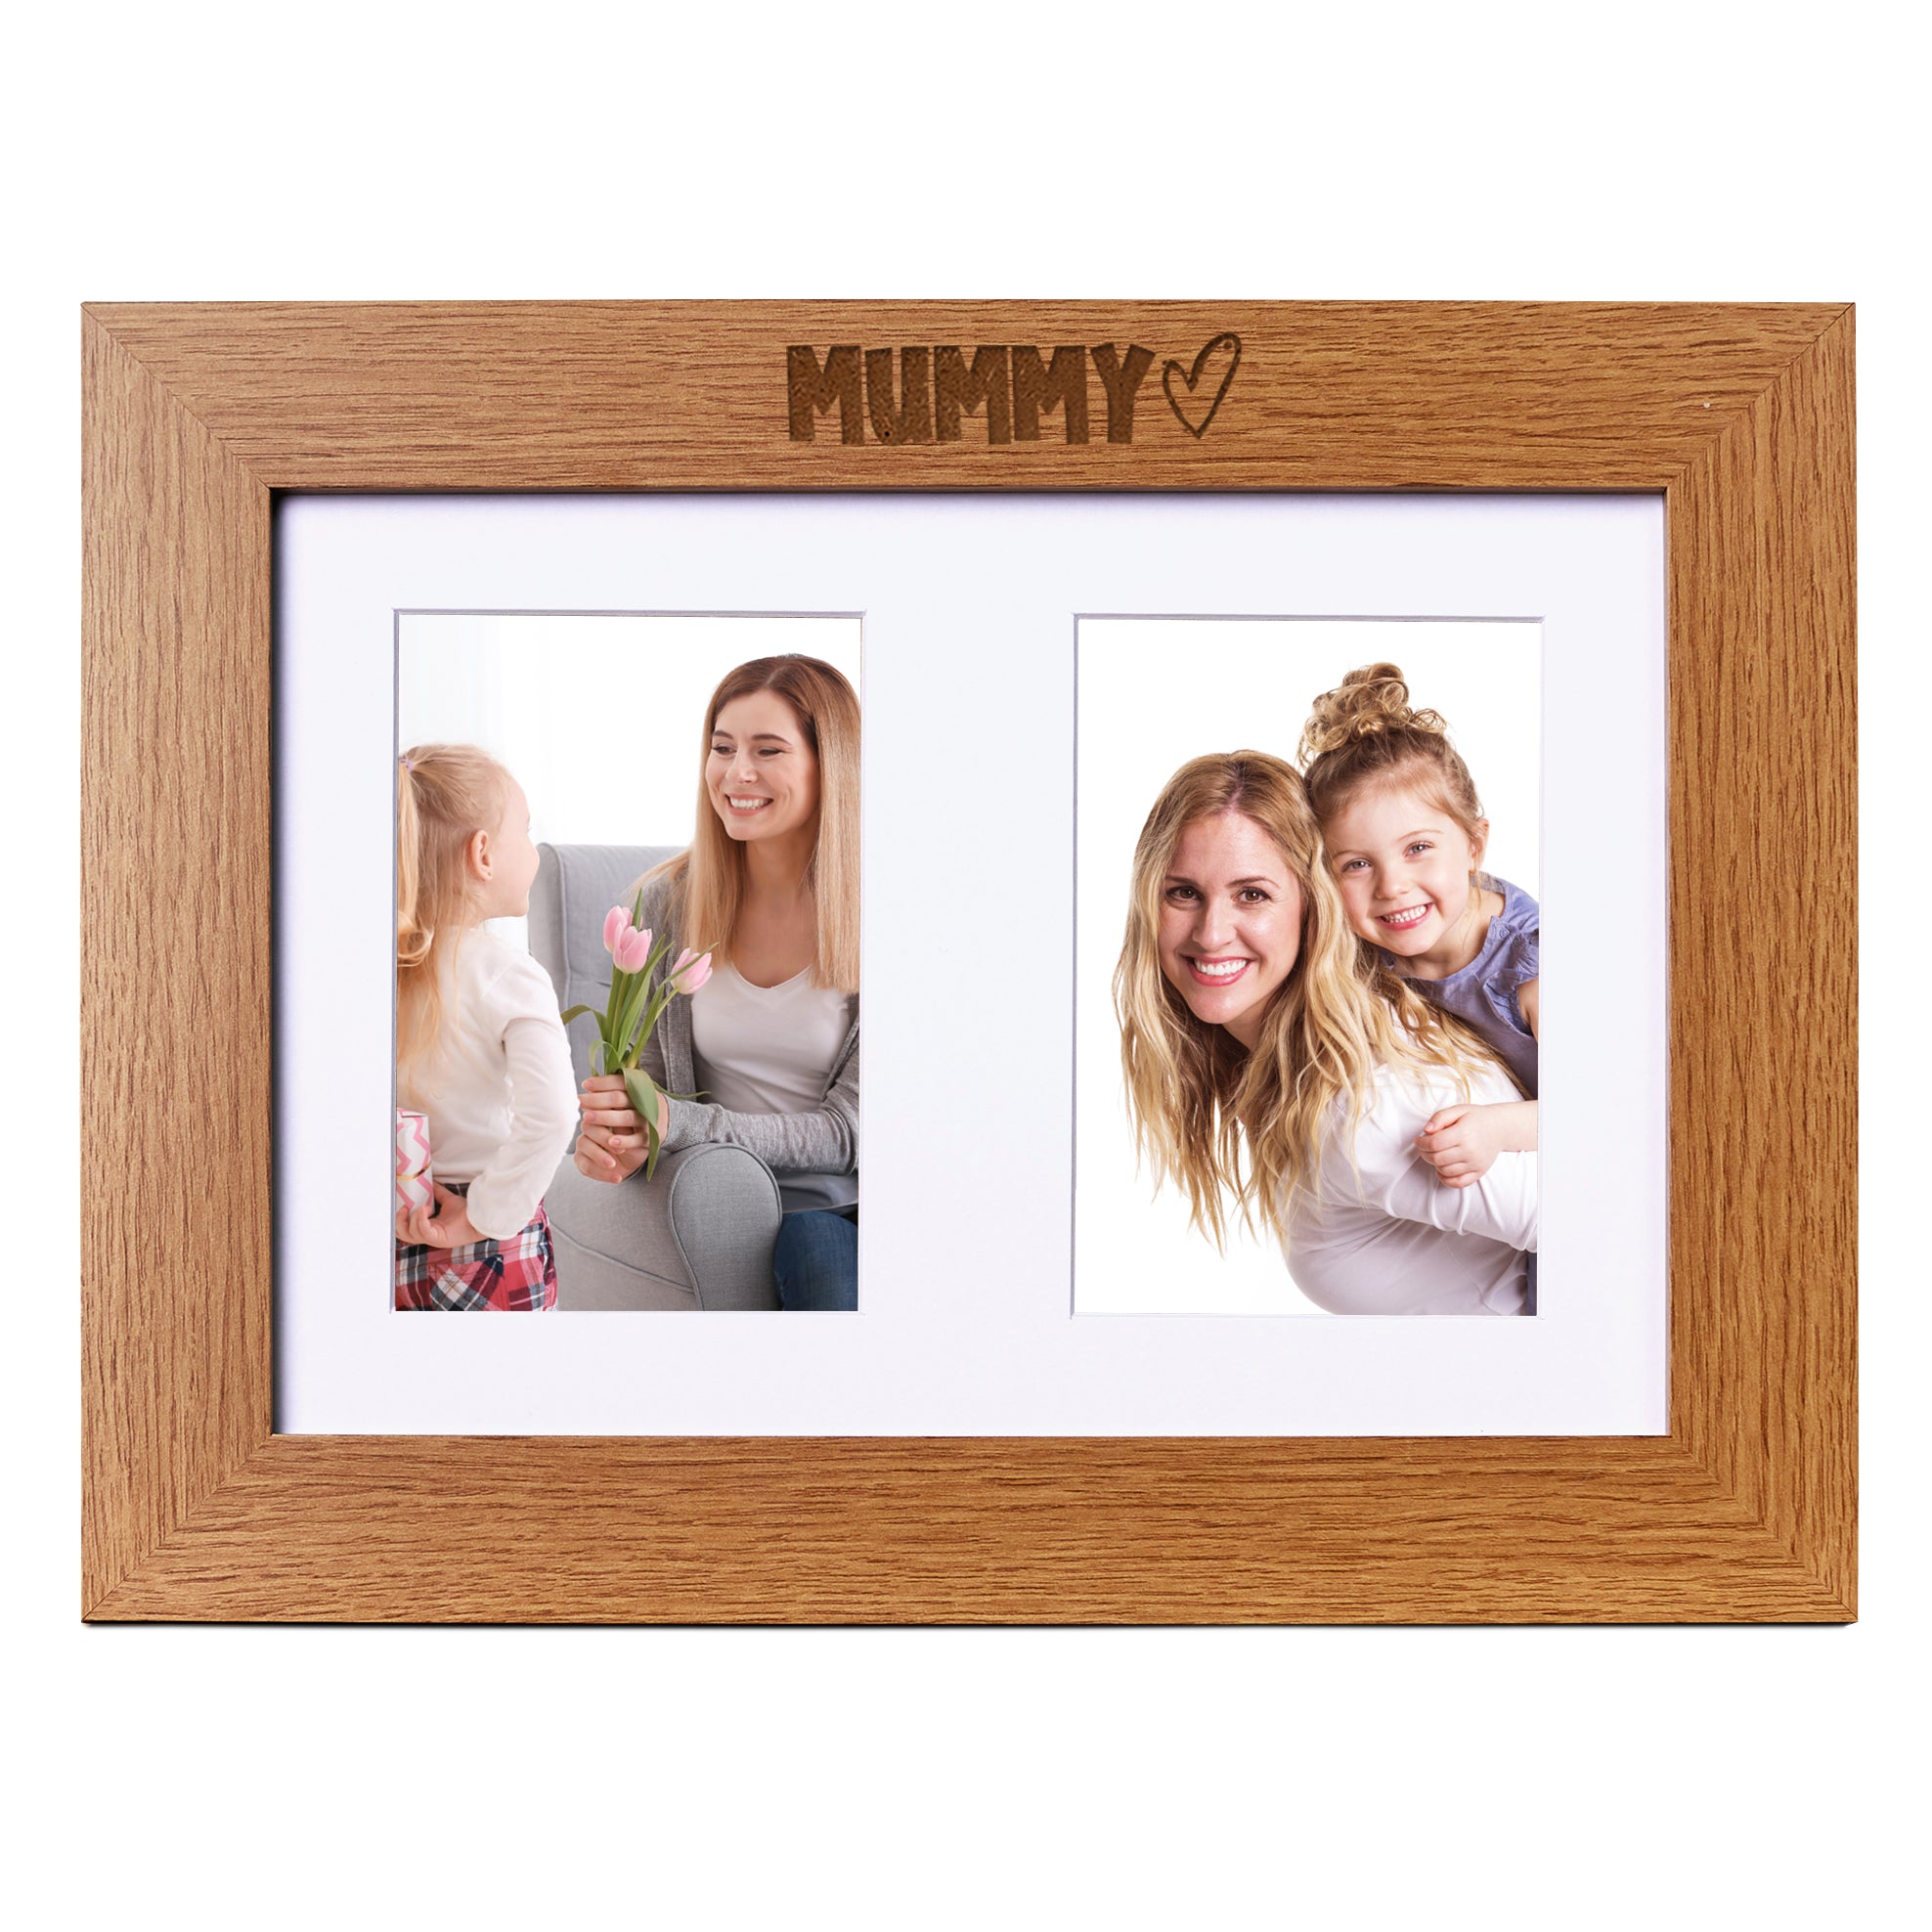 Mummy Photo Picture Frame Double 6x4 Inch